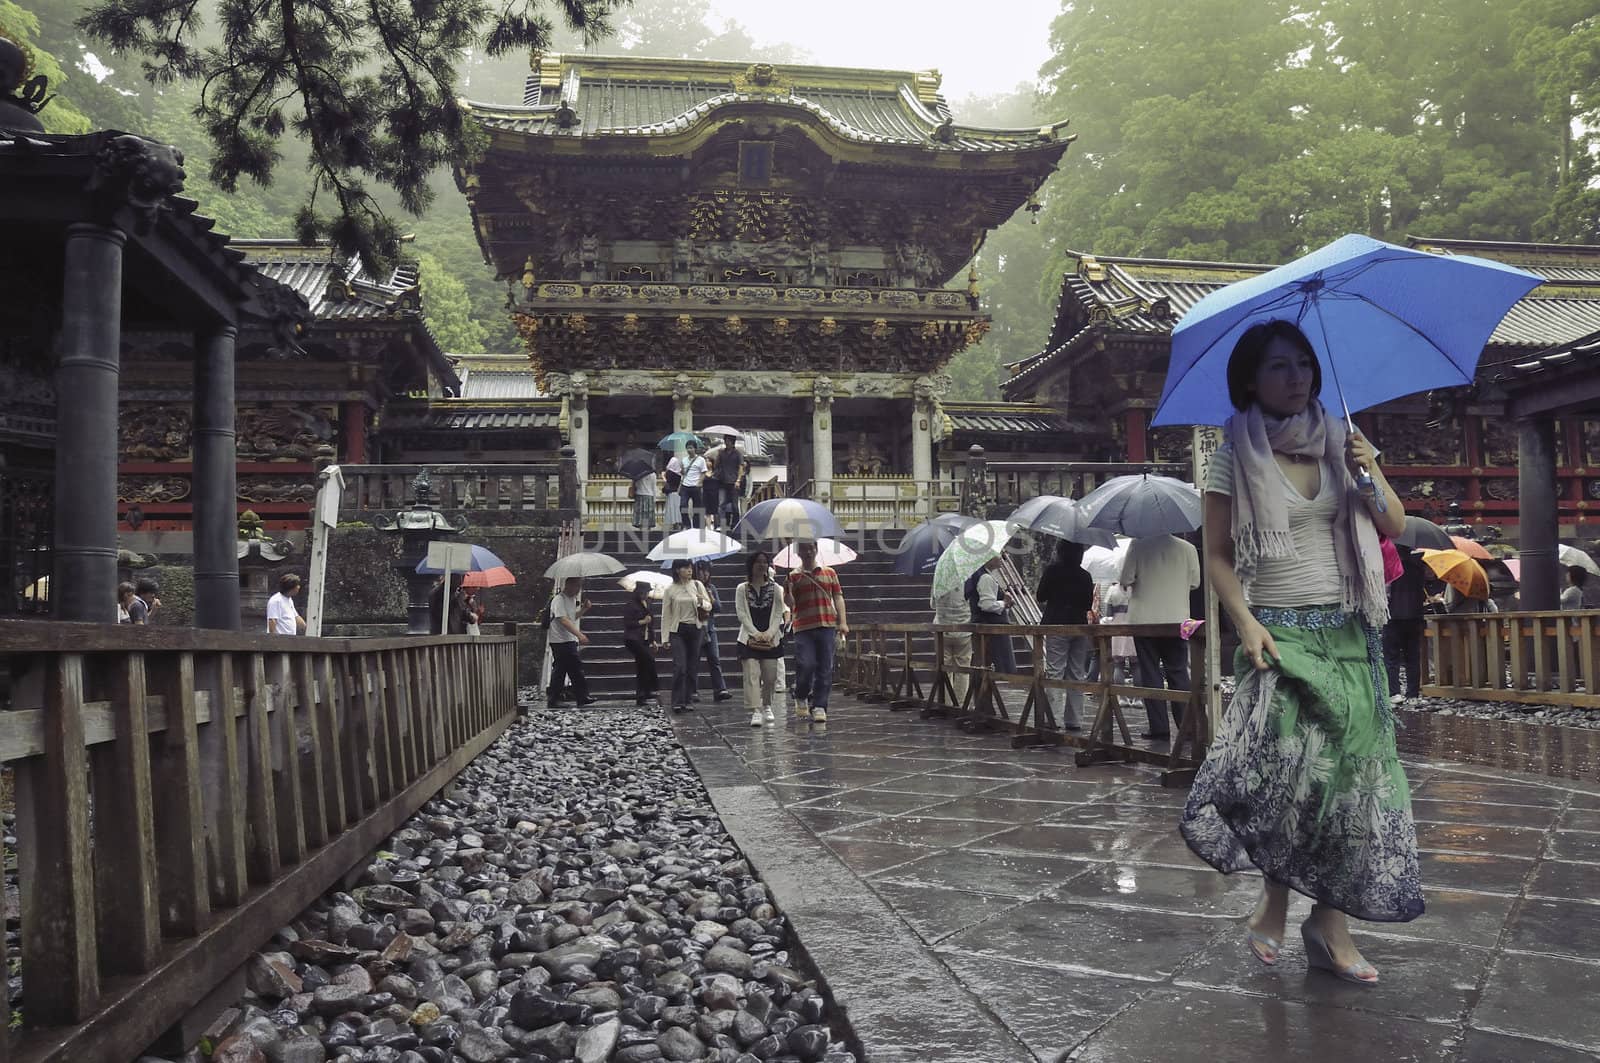 Nikko, Tochigi, Japan - June 22, 2008: Visitors walks under rain on the place of famous Toshogu shrine. The Toshogu is famous as a mausoleum of Tokugawa Ieyasu, founder of the Tokugawa shogunate, which ruled Japan for over 250 years until 1868.